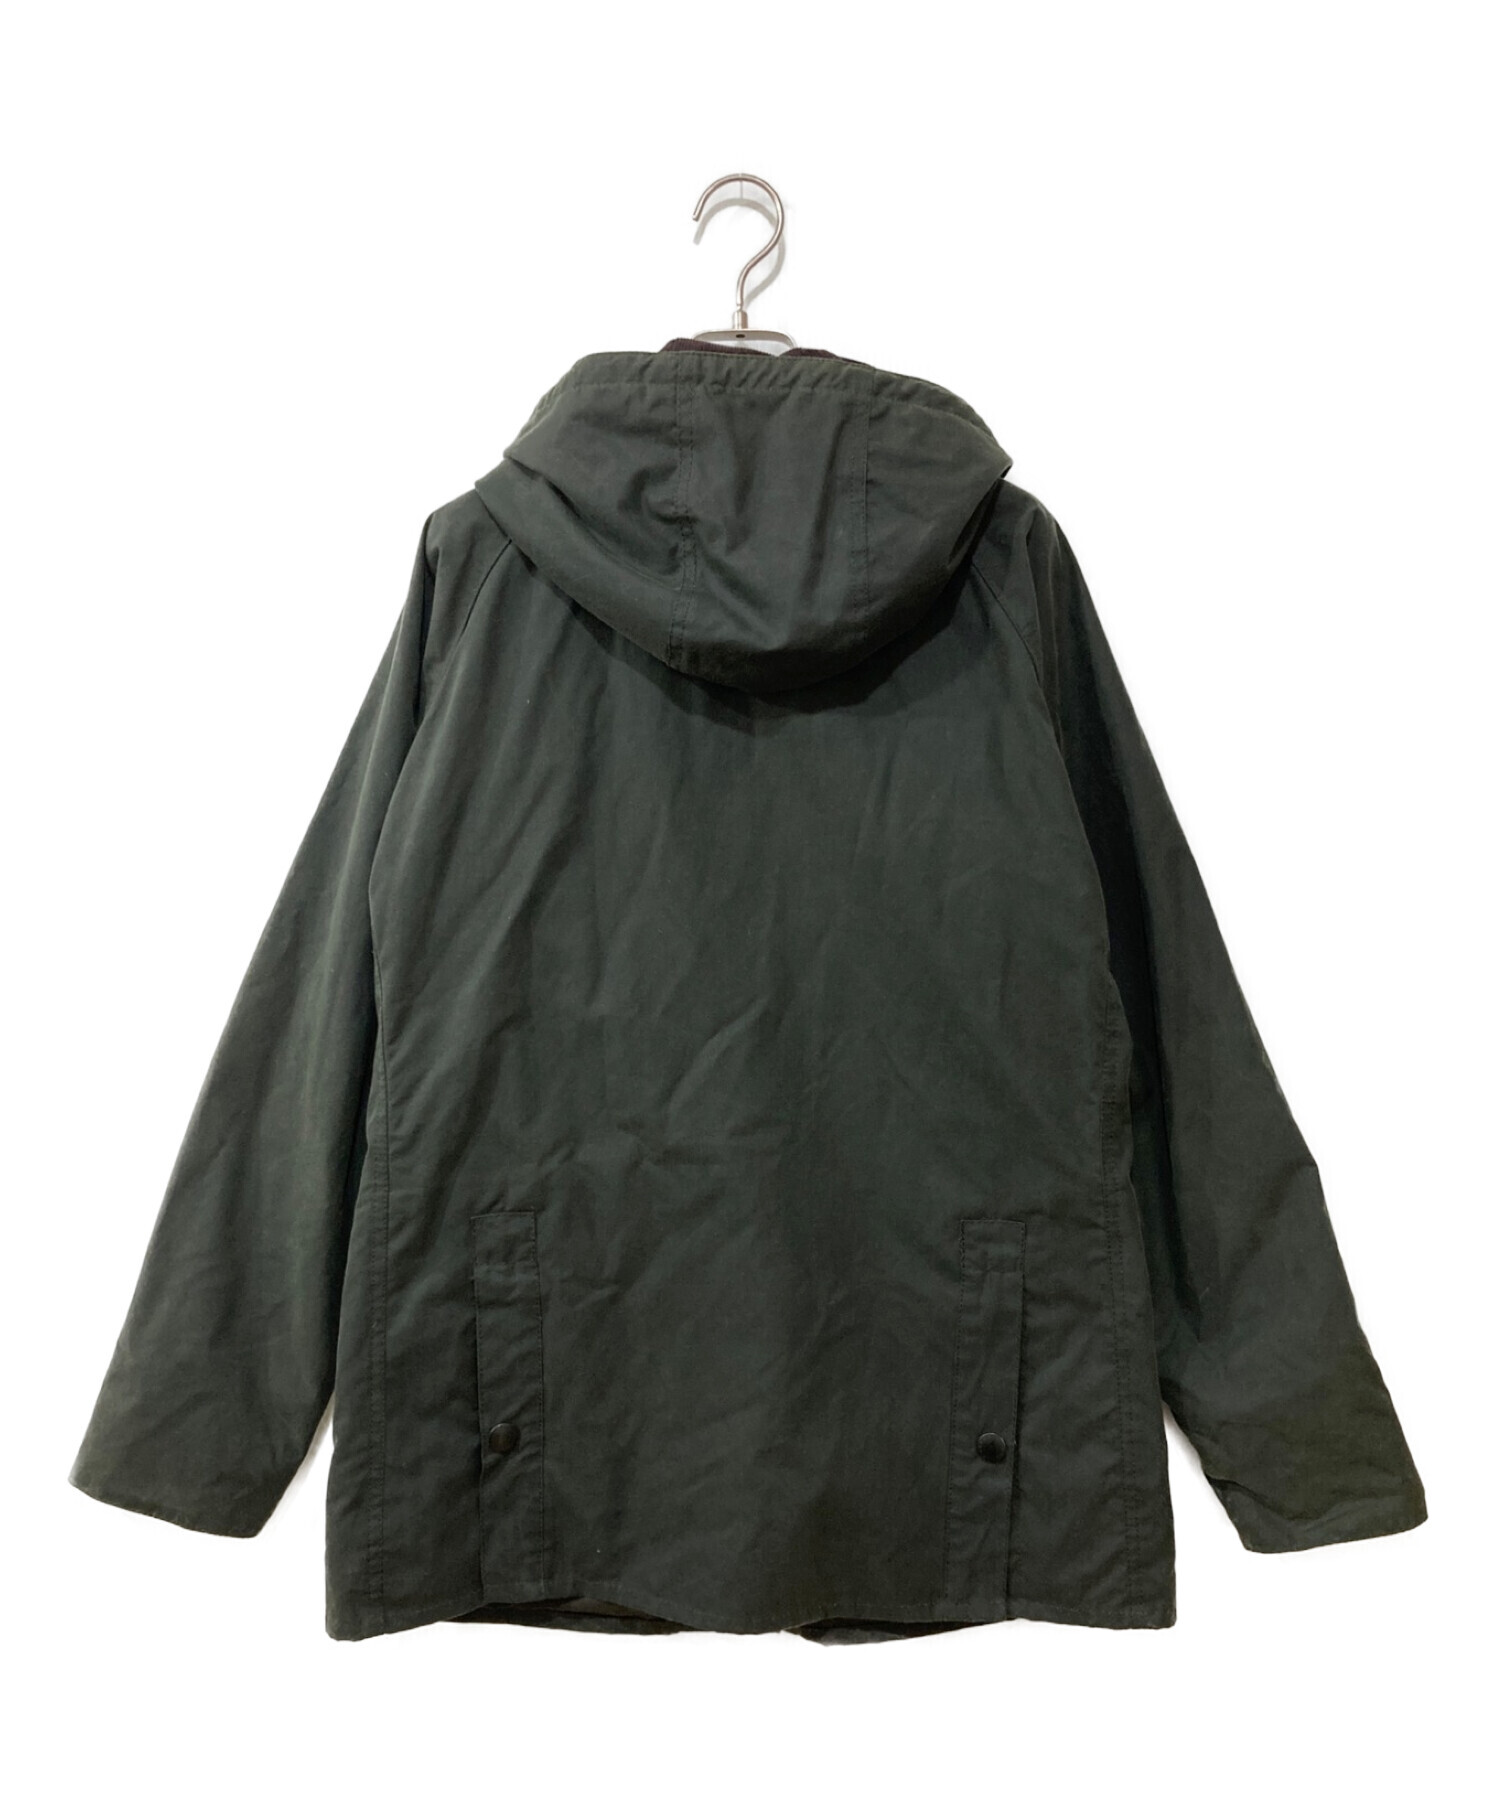 Barbour (バブアー) SL/HOODED BEDALE グリーン サイズ:36